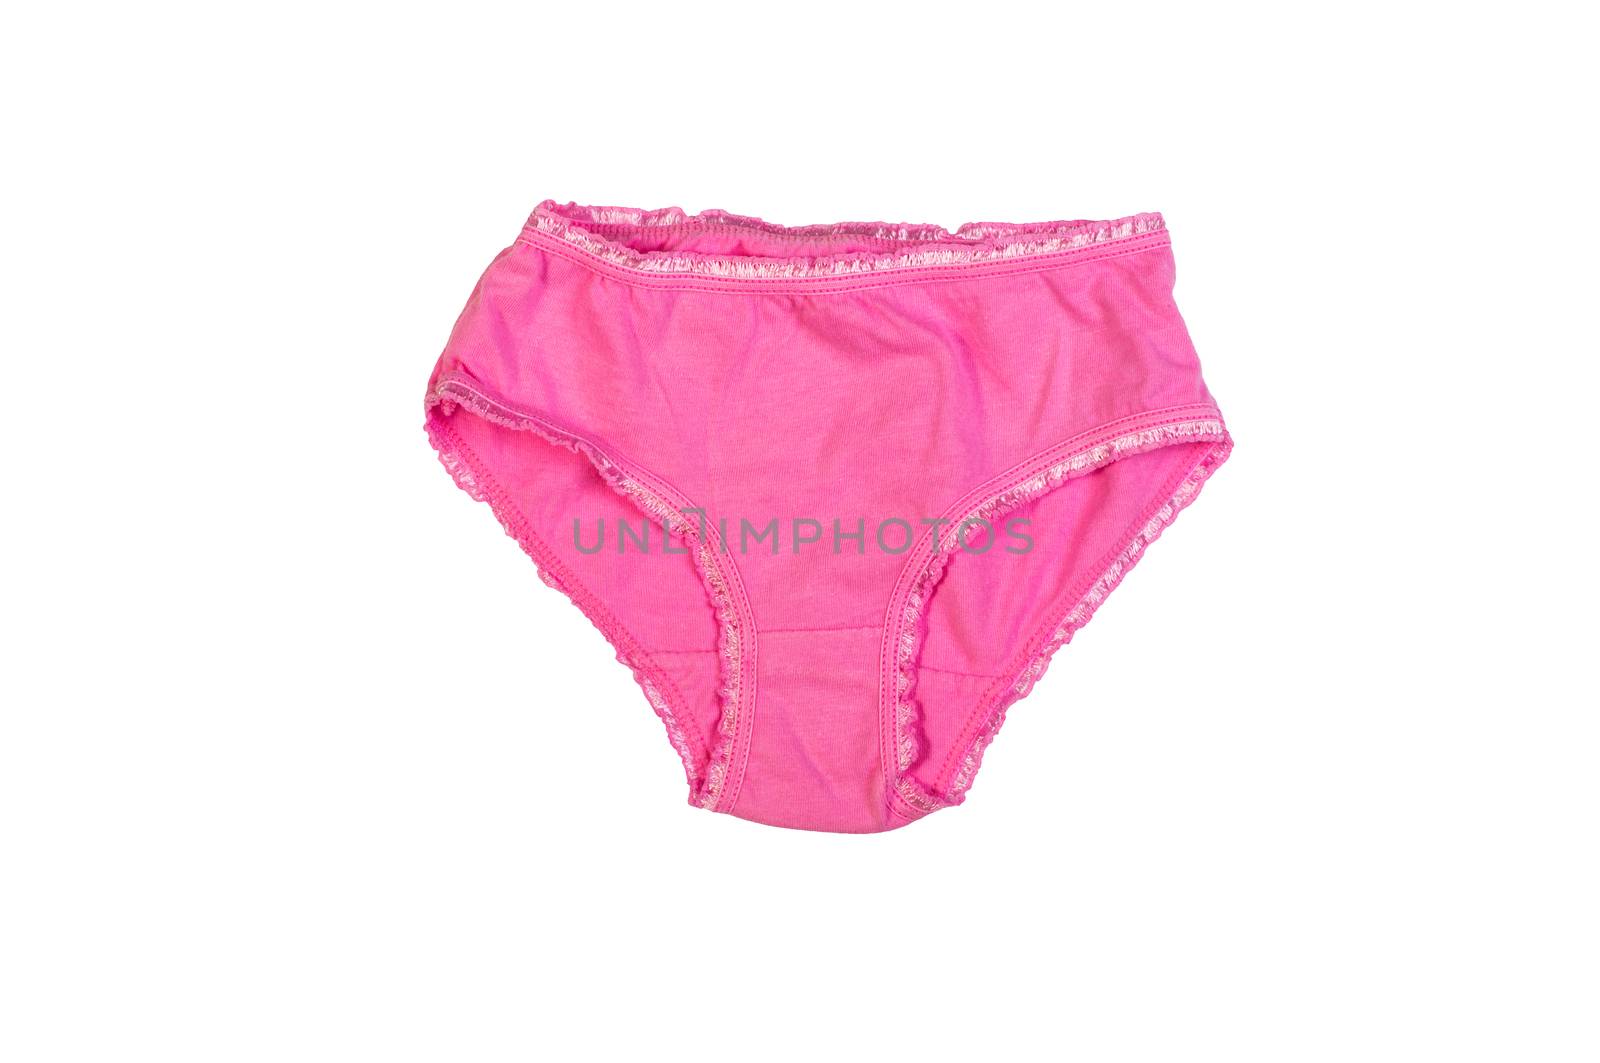 children's pink panties isolated on a white background